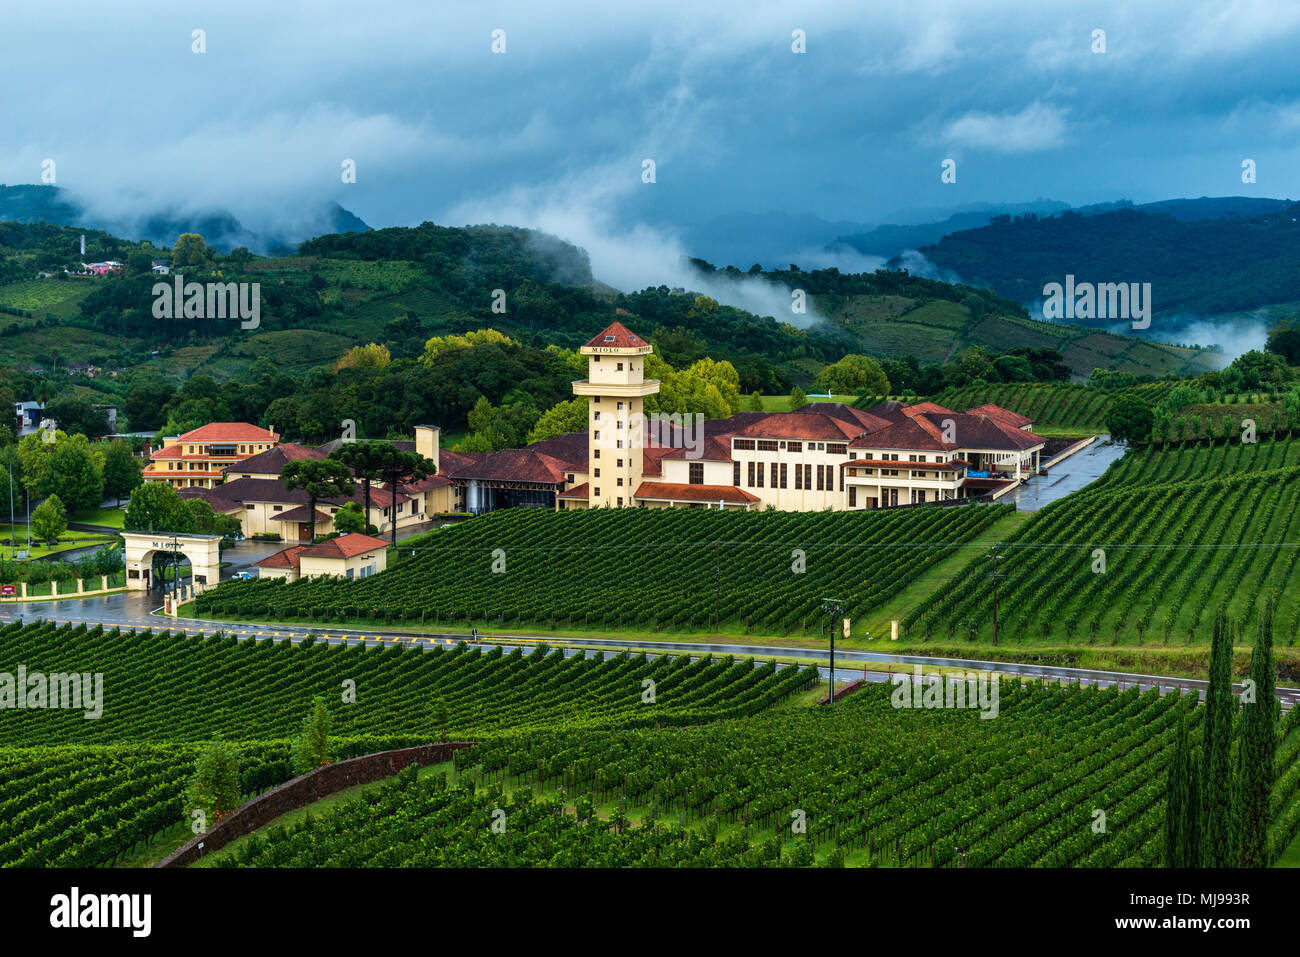 Winery 'Miolo' sourrounded by vinyards, Vale dos Vinhedos, Rio Grande do Sul, Brazil, Latin America Stock Photo